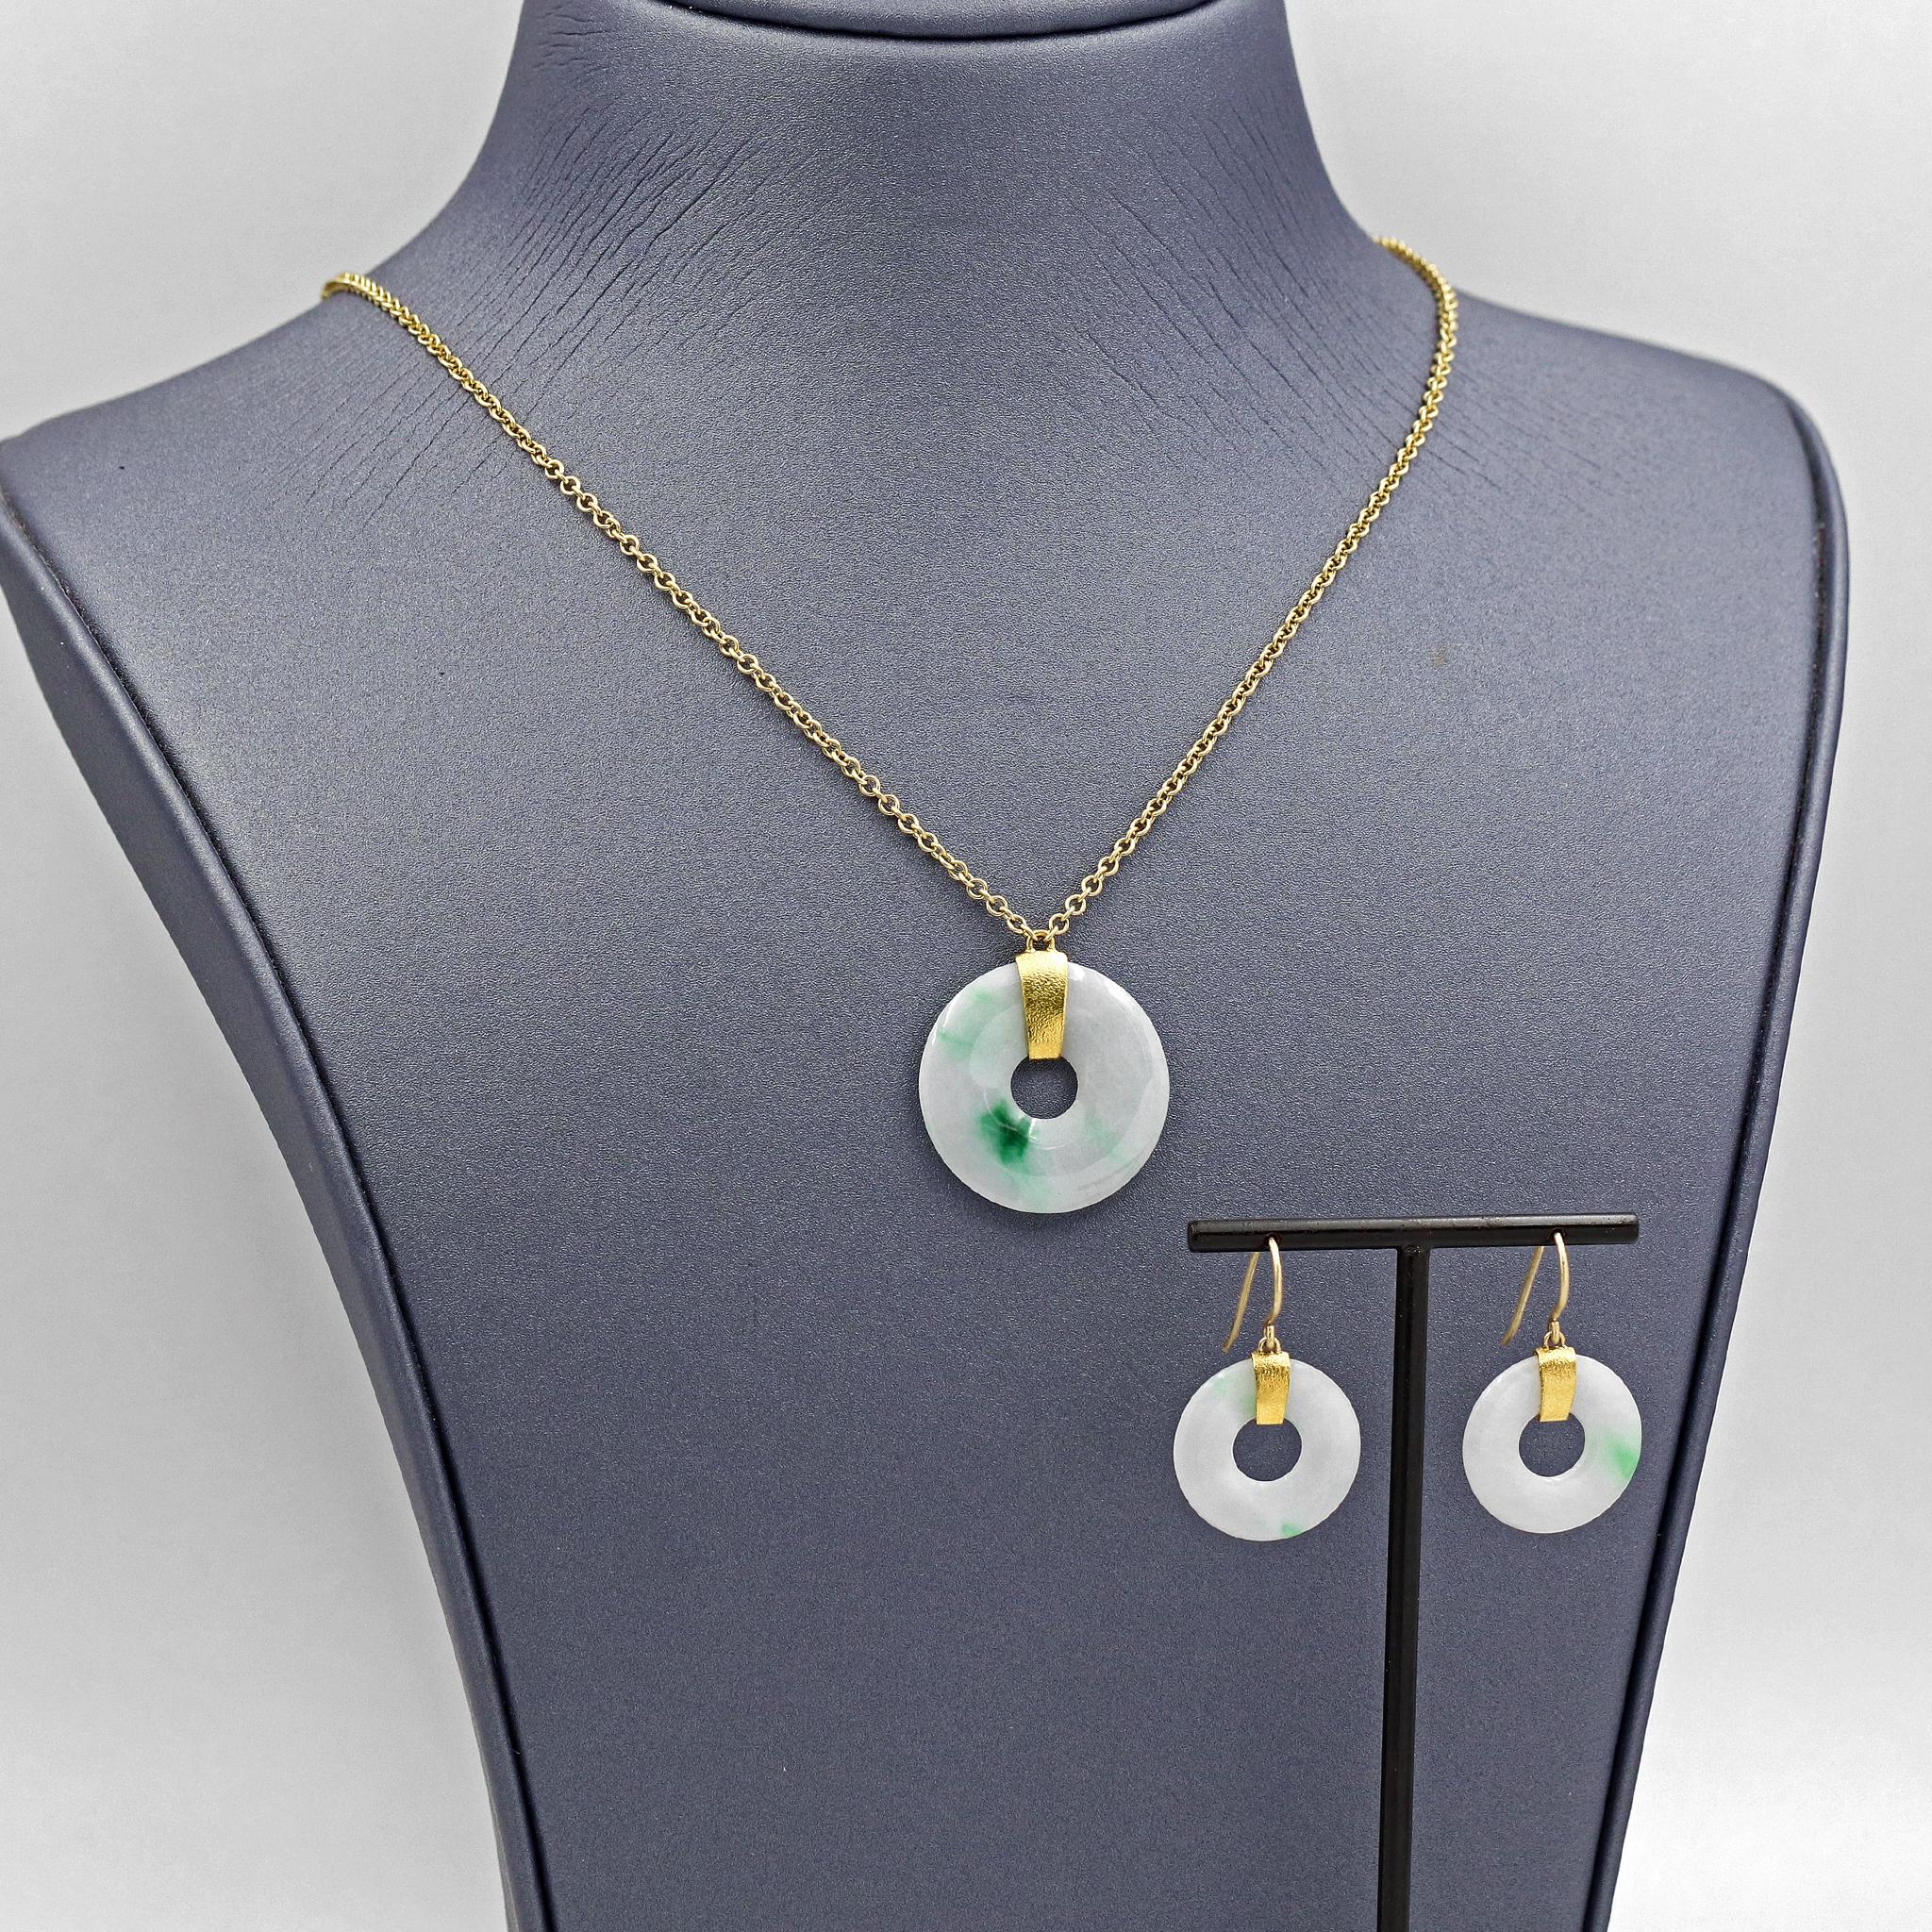 One of a Kind Necklace and Earring Suite hand-fabricated in signature-finished 22k yellow gold by jewelry maker Devta Doolan featuring three matched, A grade, Untreated Burmese Jadeite Discs and respectively accented with an eighteen inch 18k yellow